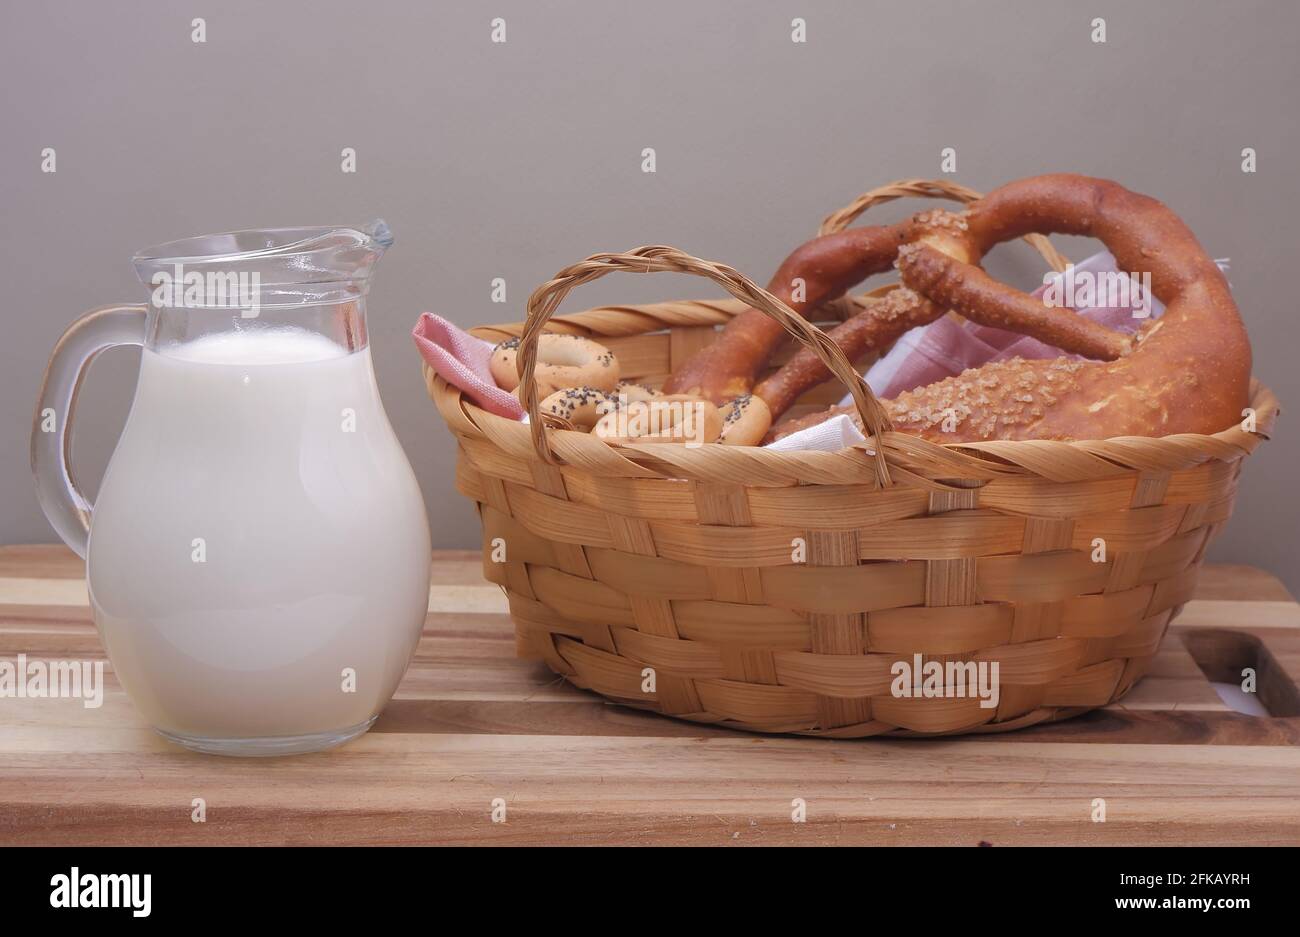 a glass jug of milk sits on the cutting board next to a basket of buns and dried poppy seeds. Stock Photo